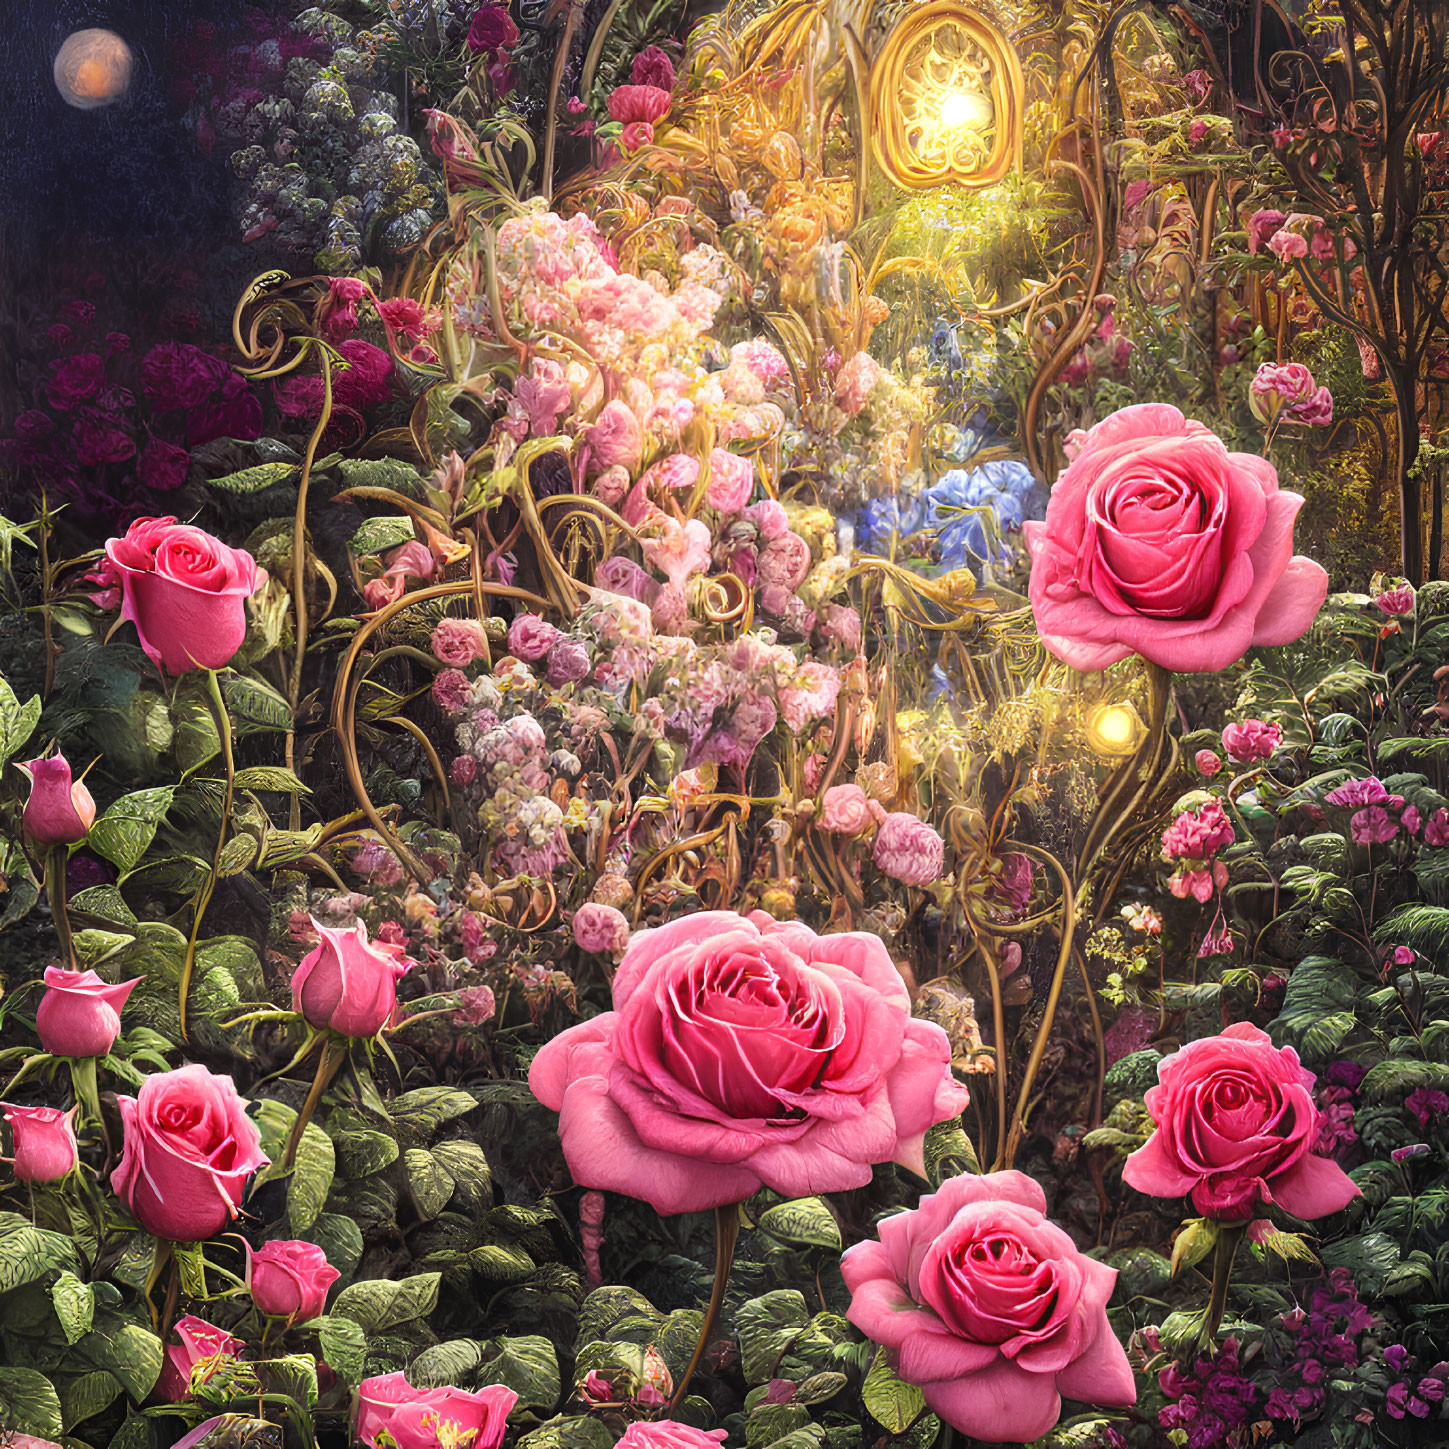 Lush garden with oversized pink roses and golden gate